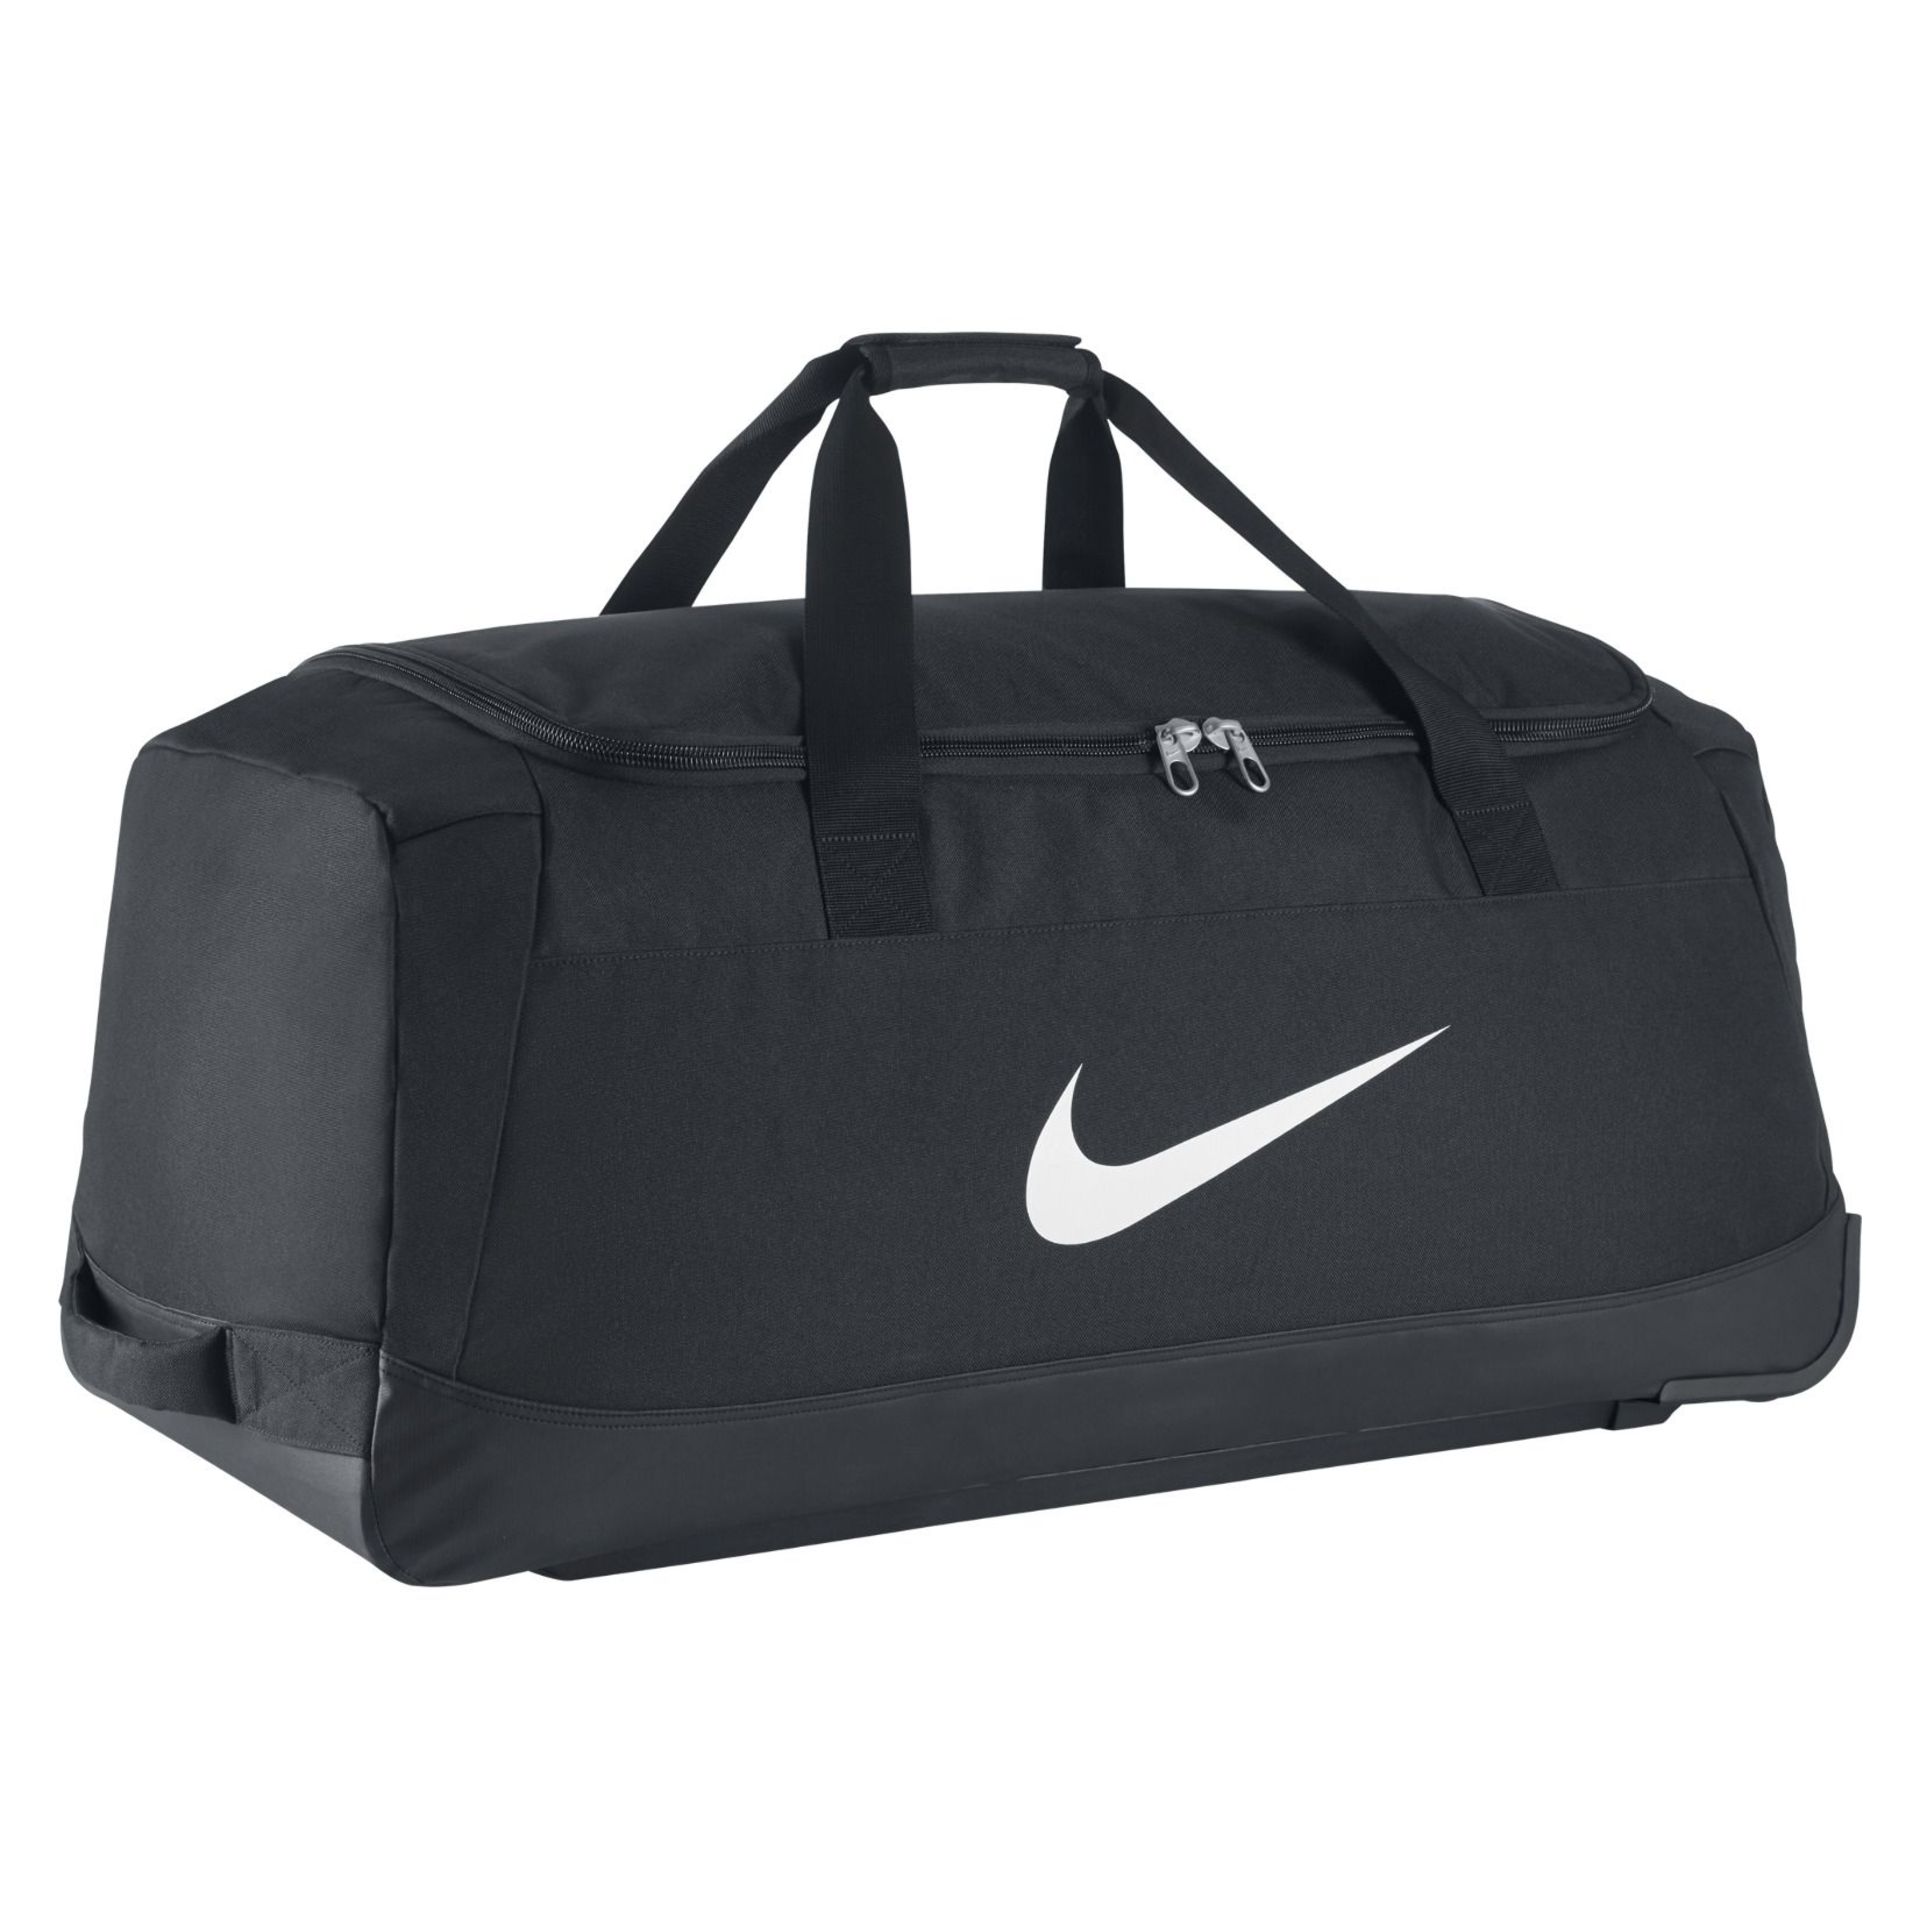 NIKE CLUB TEAM ROLLER BAG. - R14.12. A spacious bag with separate shoe compartment - Adjustable,